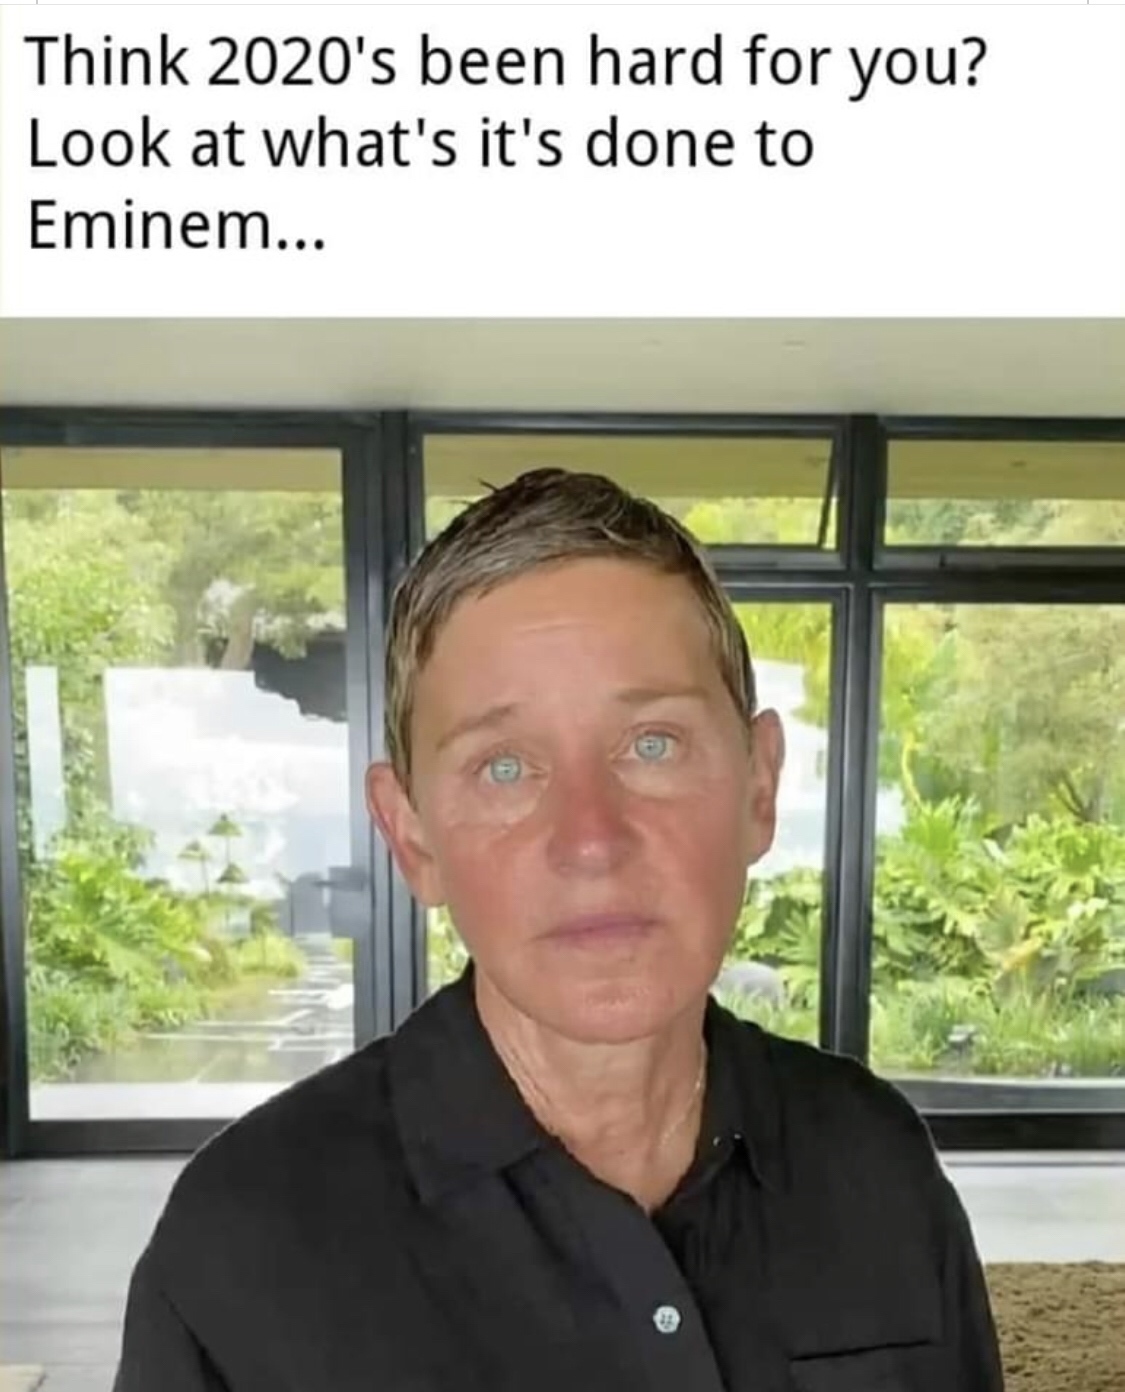 ellen adrenochrome withdrawal - Think 2020's been hard for you? Look at what's it's done to Eminem...